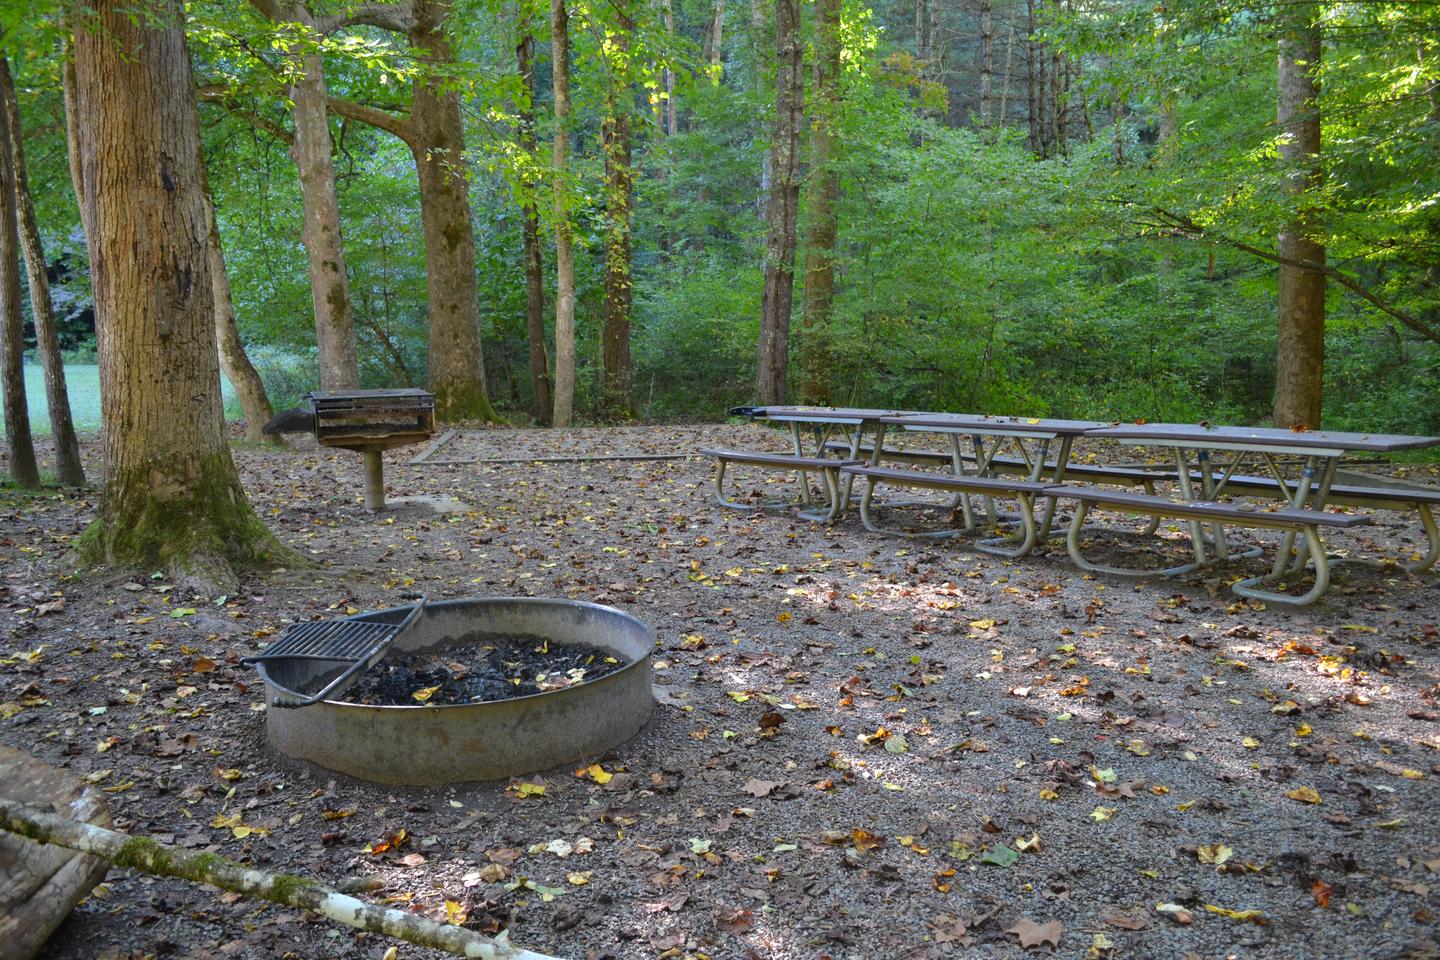 Cataloochee Group Site 2View of picnic tables for group site 2 with large fire ring in foreground and elevated grill located near picnic table area